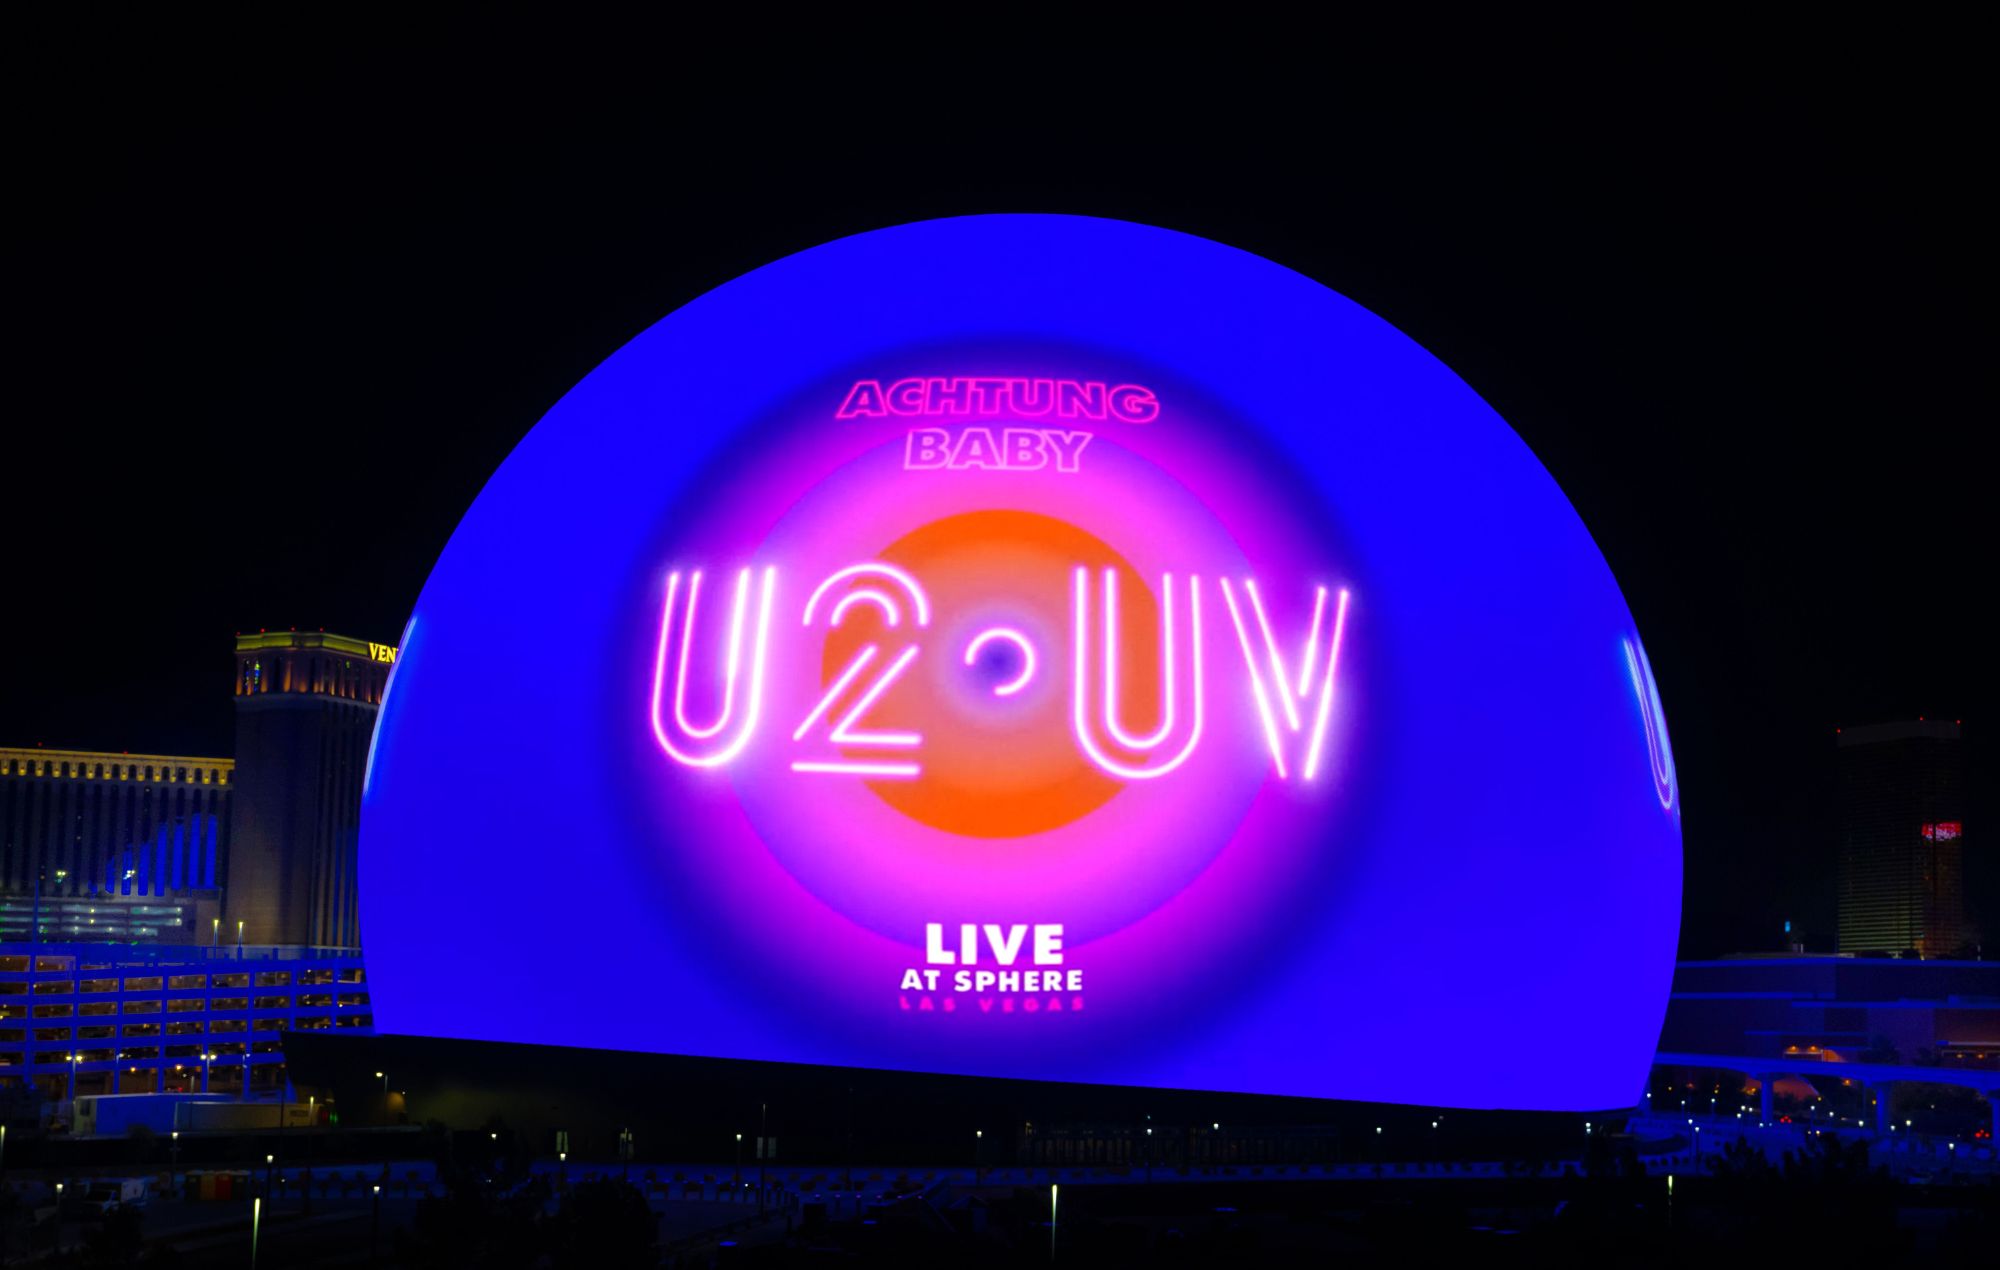 U2 at Sphere: Behind the Marriage Between the Band and Vegas' $2B Orb